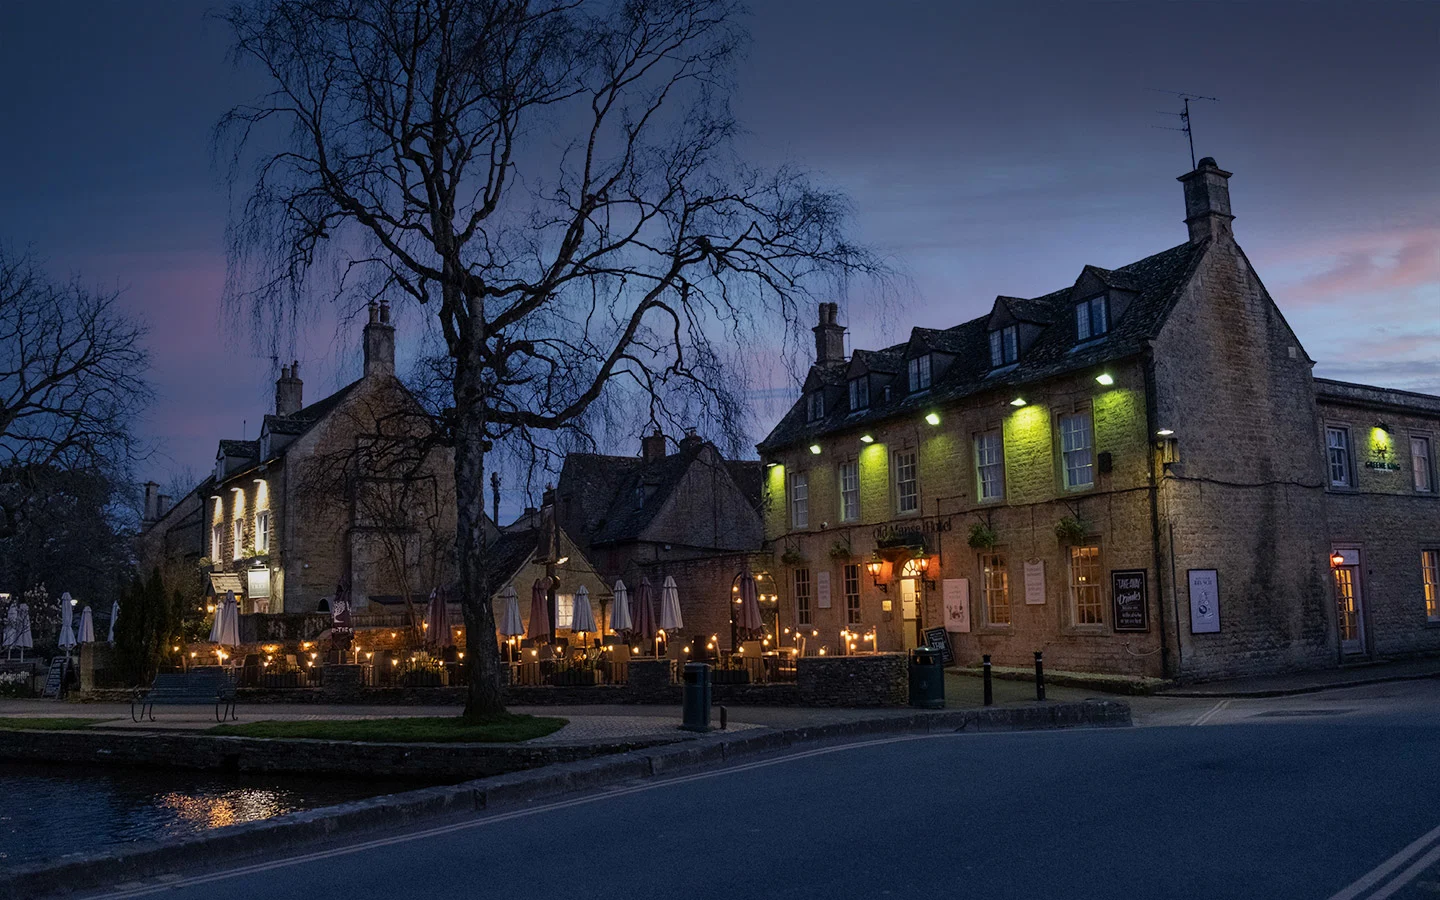 The Old Manse pub in Bourton-on-the-Water by night